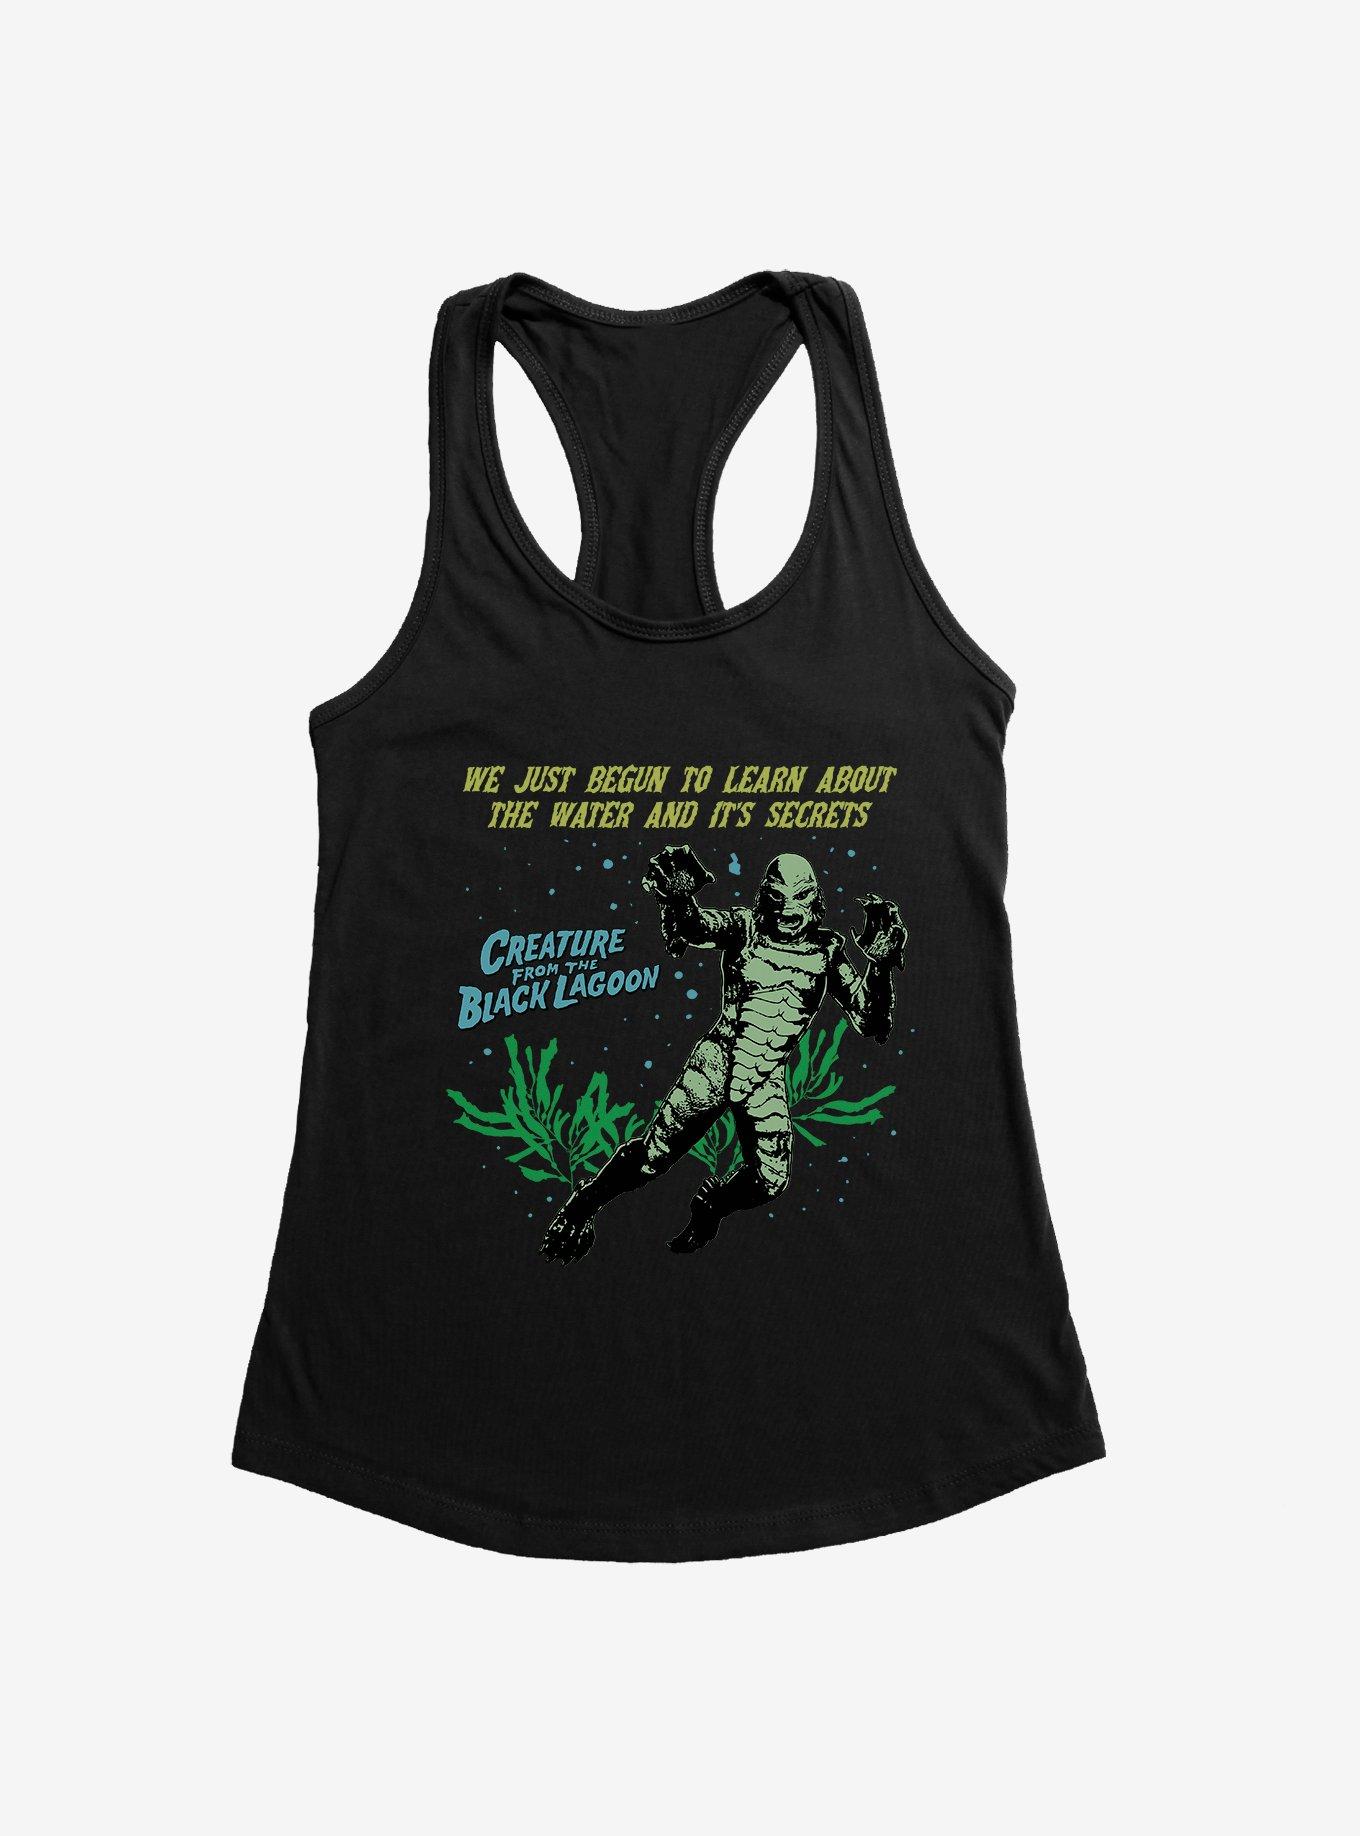 Creature From The Black Lagoon Water And It's Secrets Womens Tank Top, BLACK, hi-res